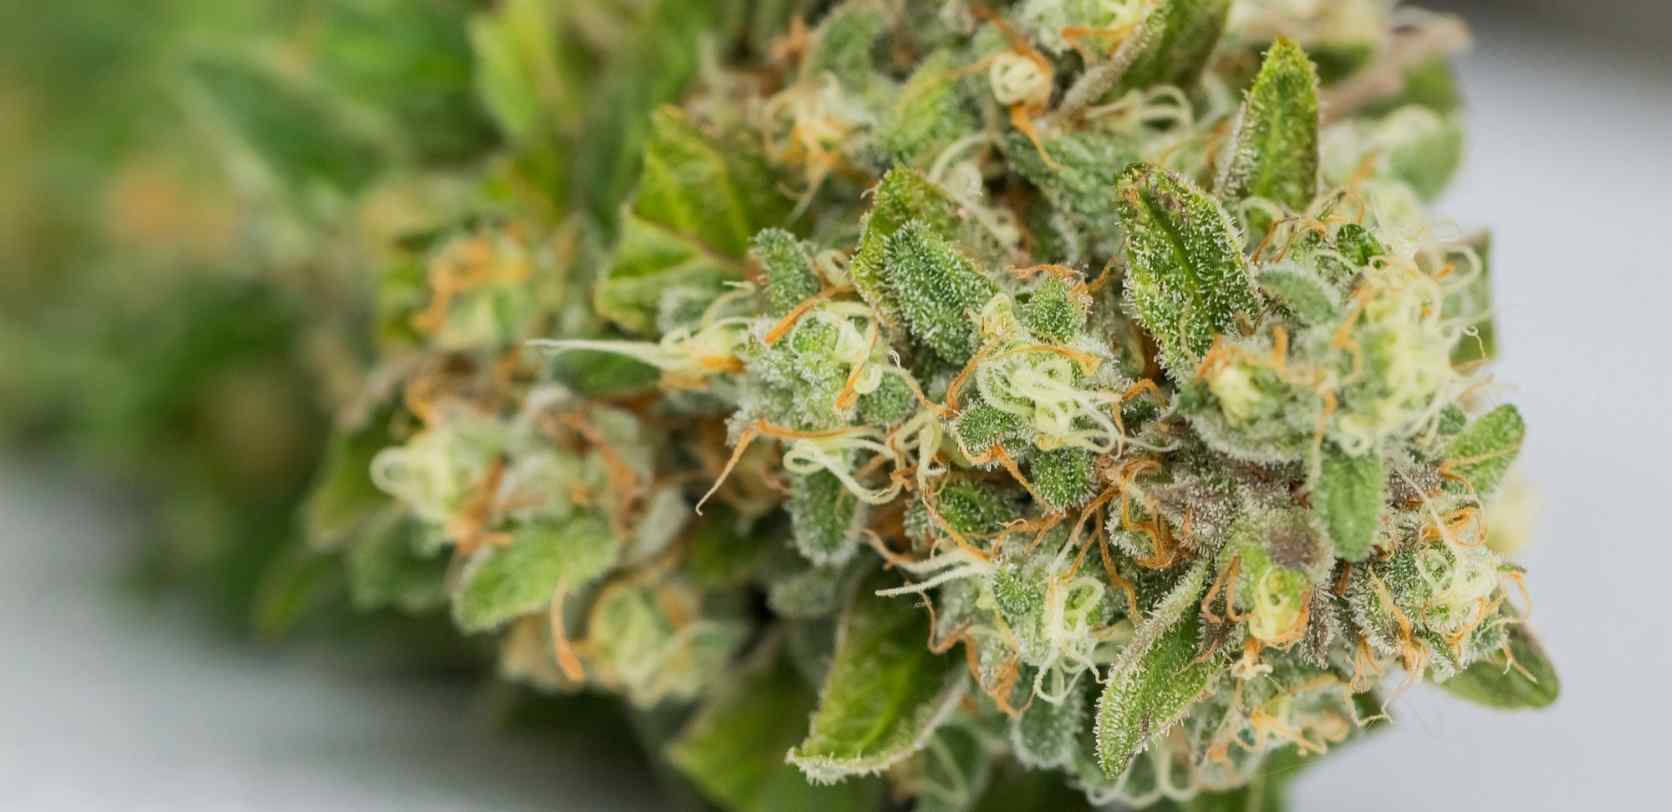 Finally, Hybrid strains offer the best of both Sativa and Indica. They are usually grown in greenhouses or on farms, and they are made by blending Sativa and Indica strains. 